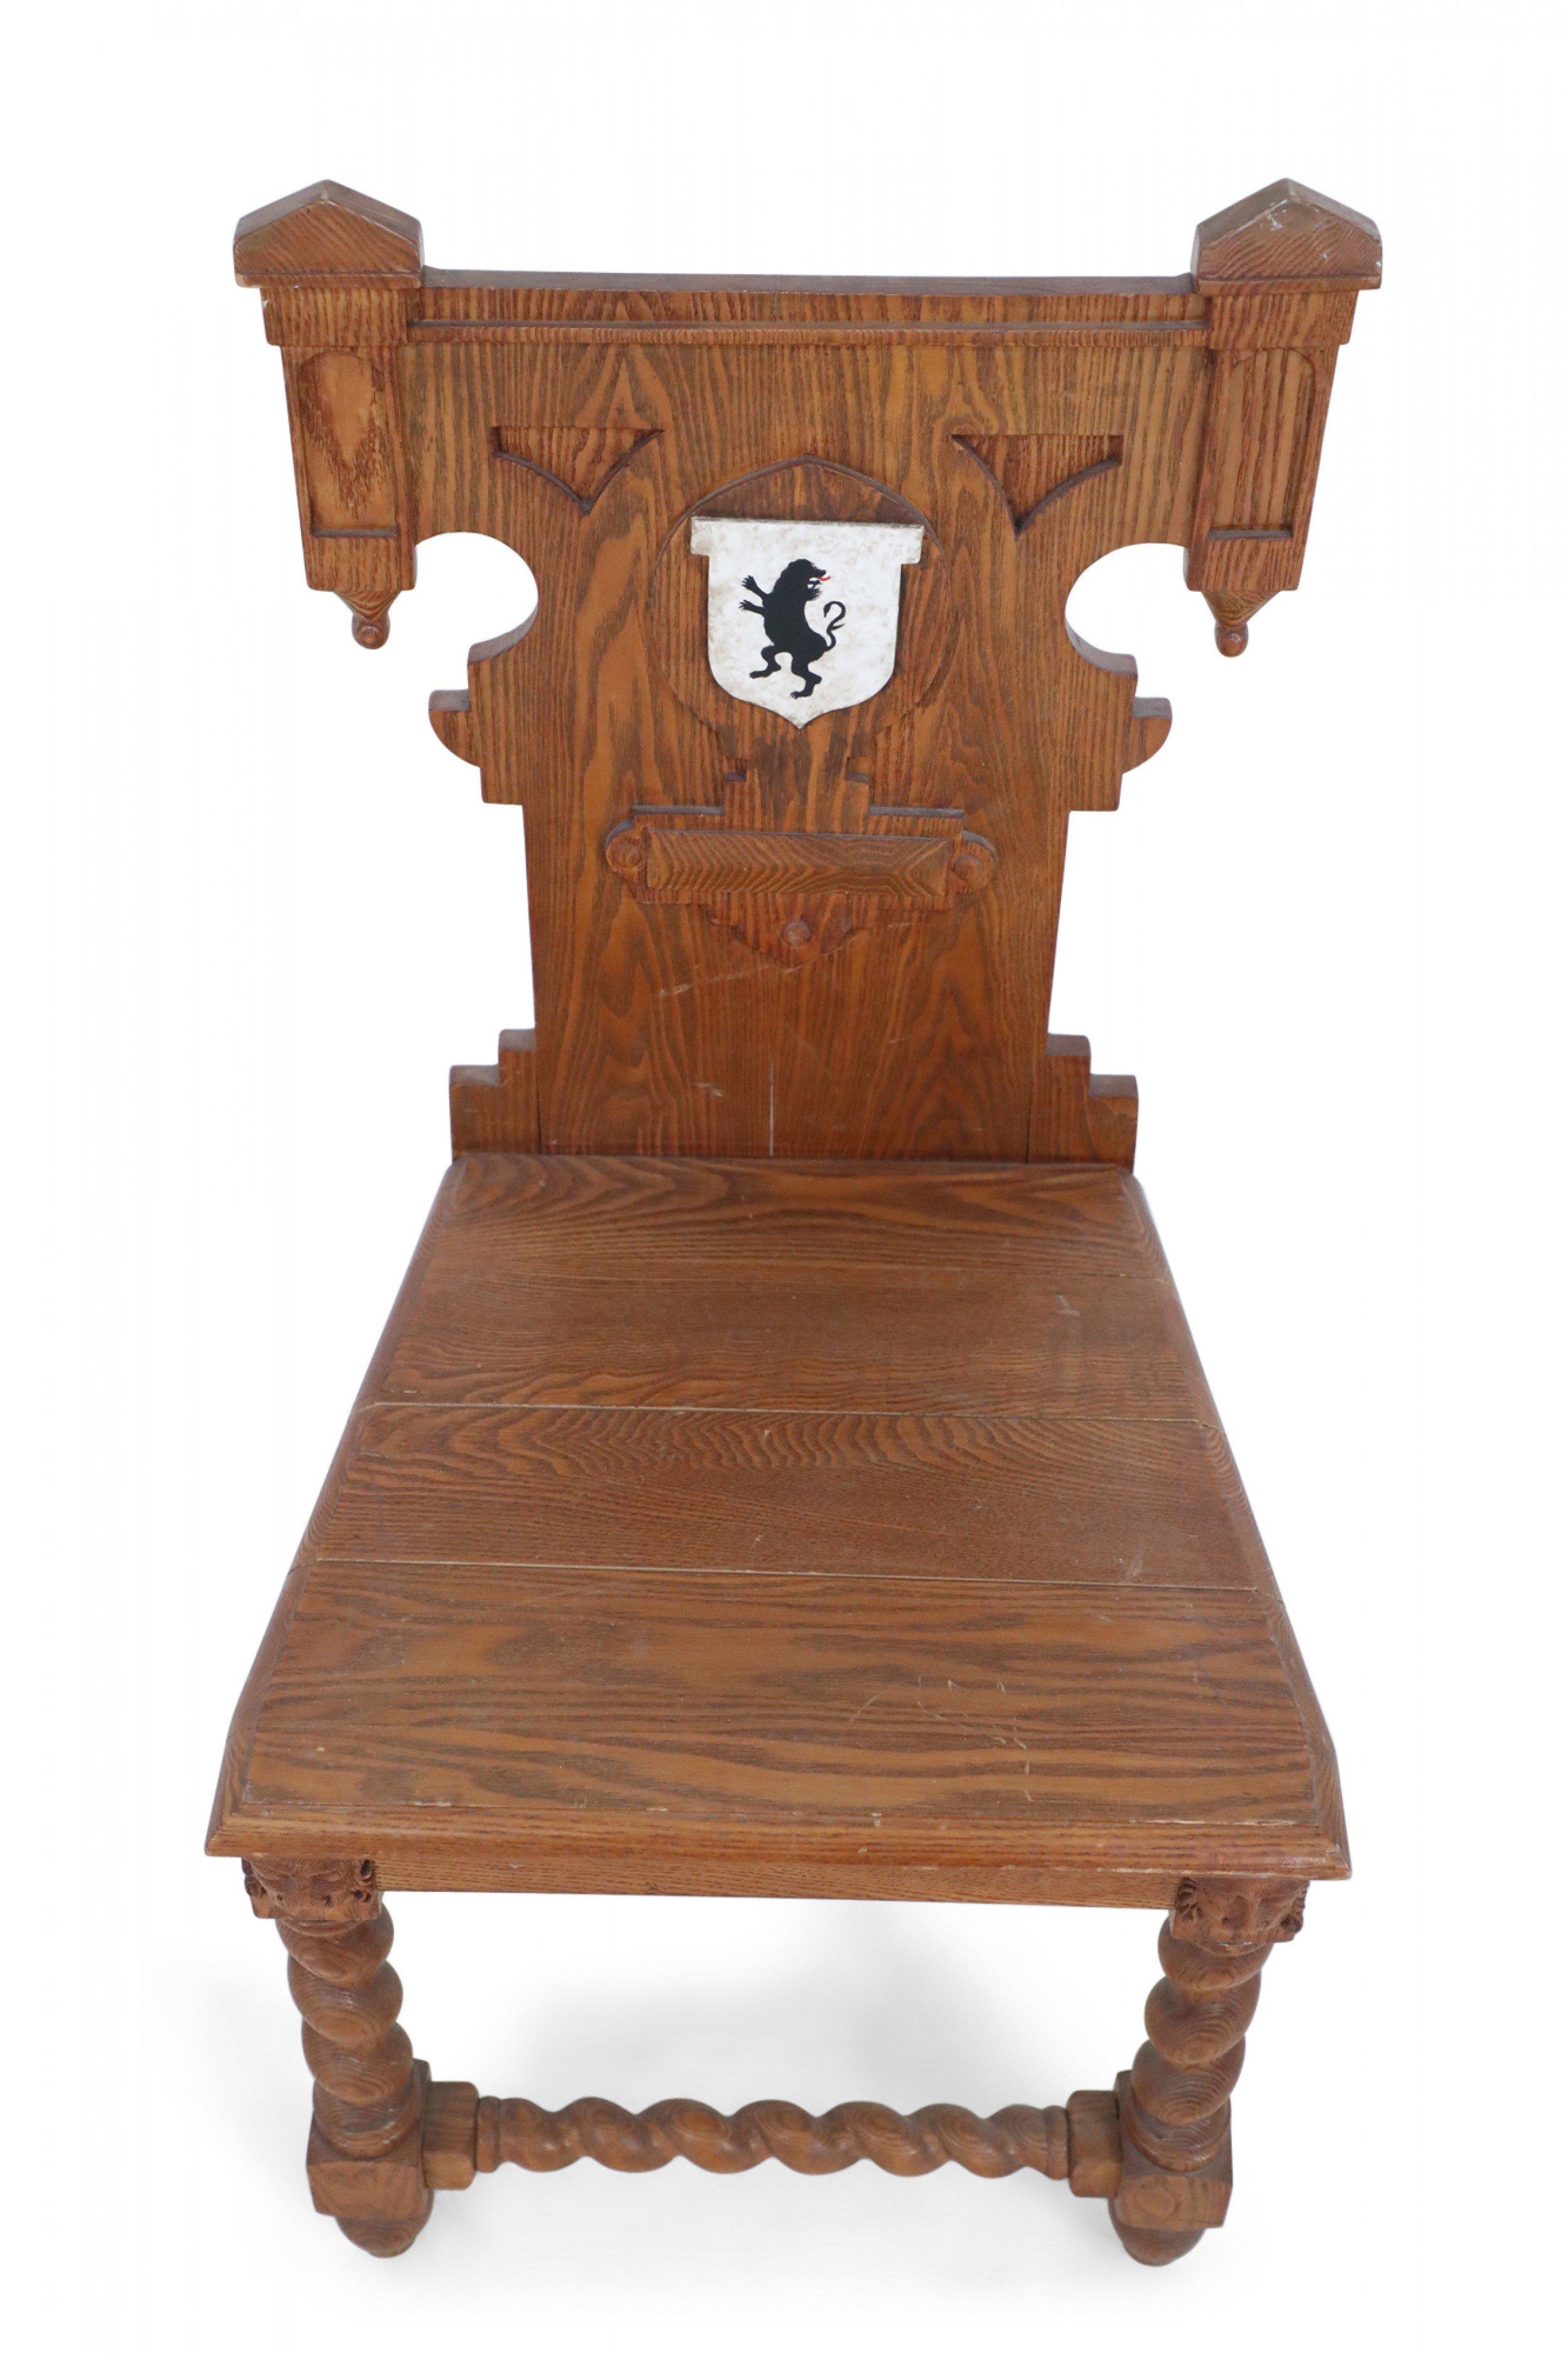 Italian Renaissance Carved Wooden Turn-Legged Side Chair For Sale 10